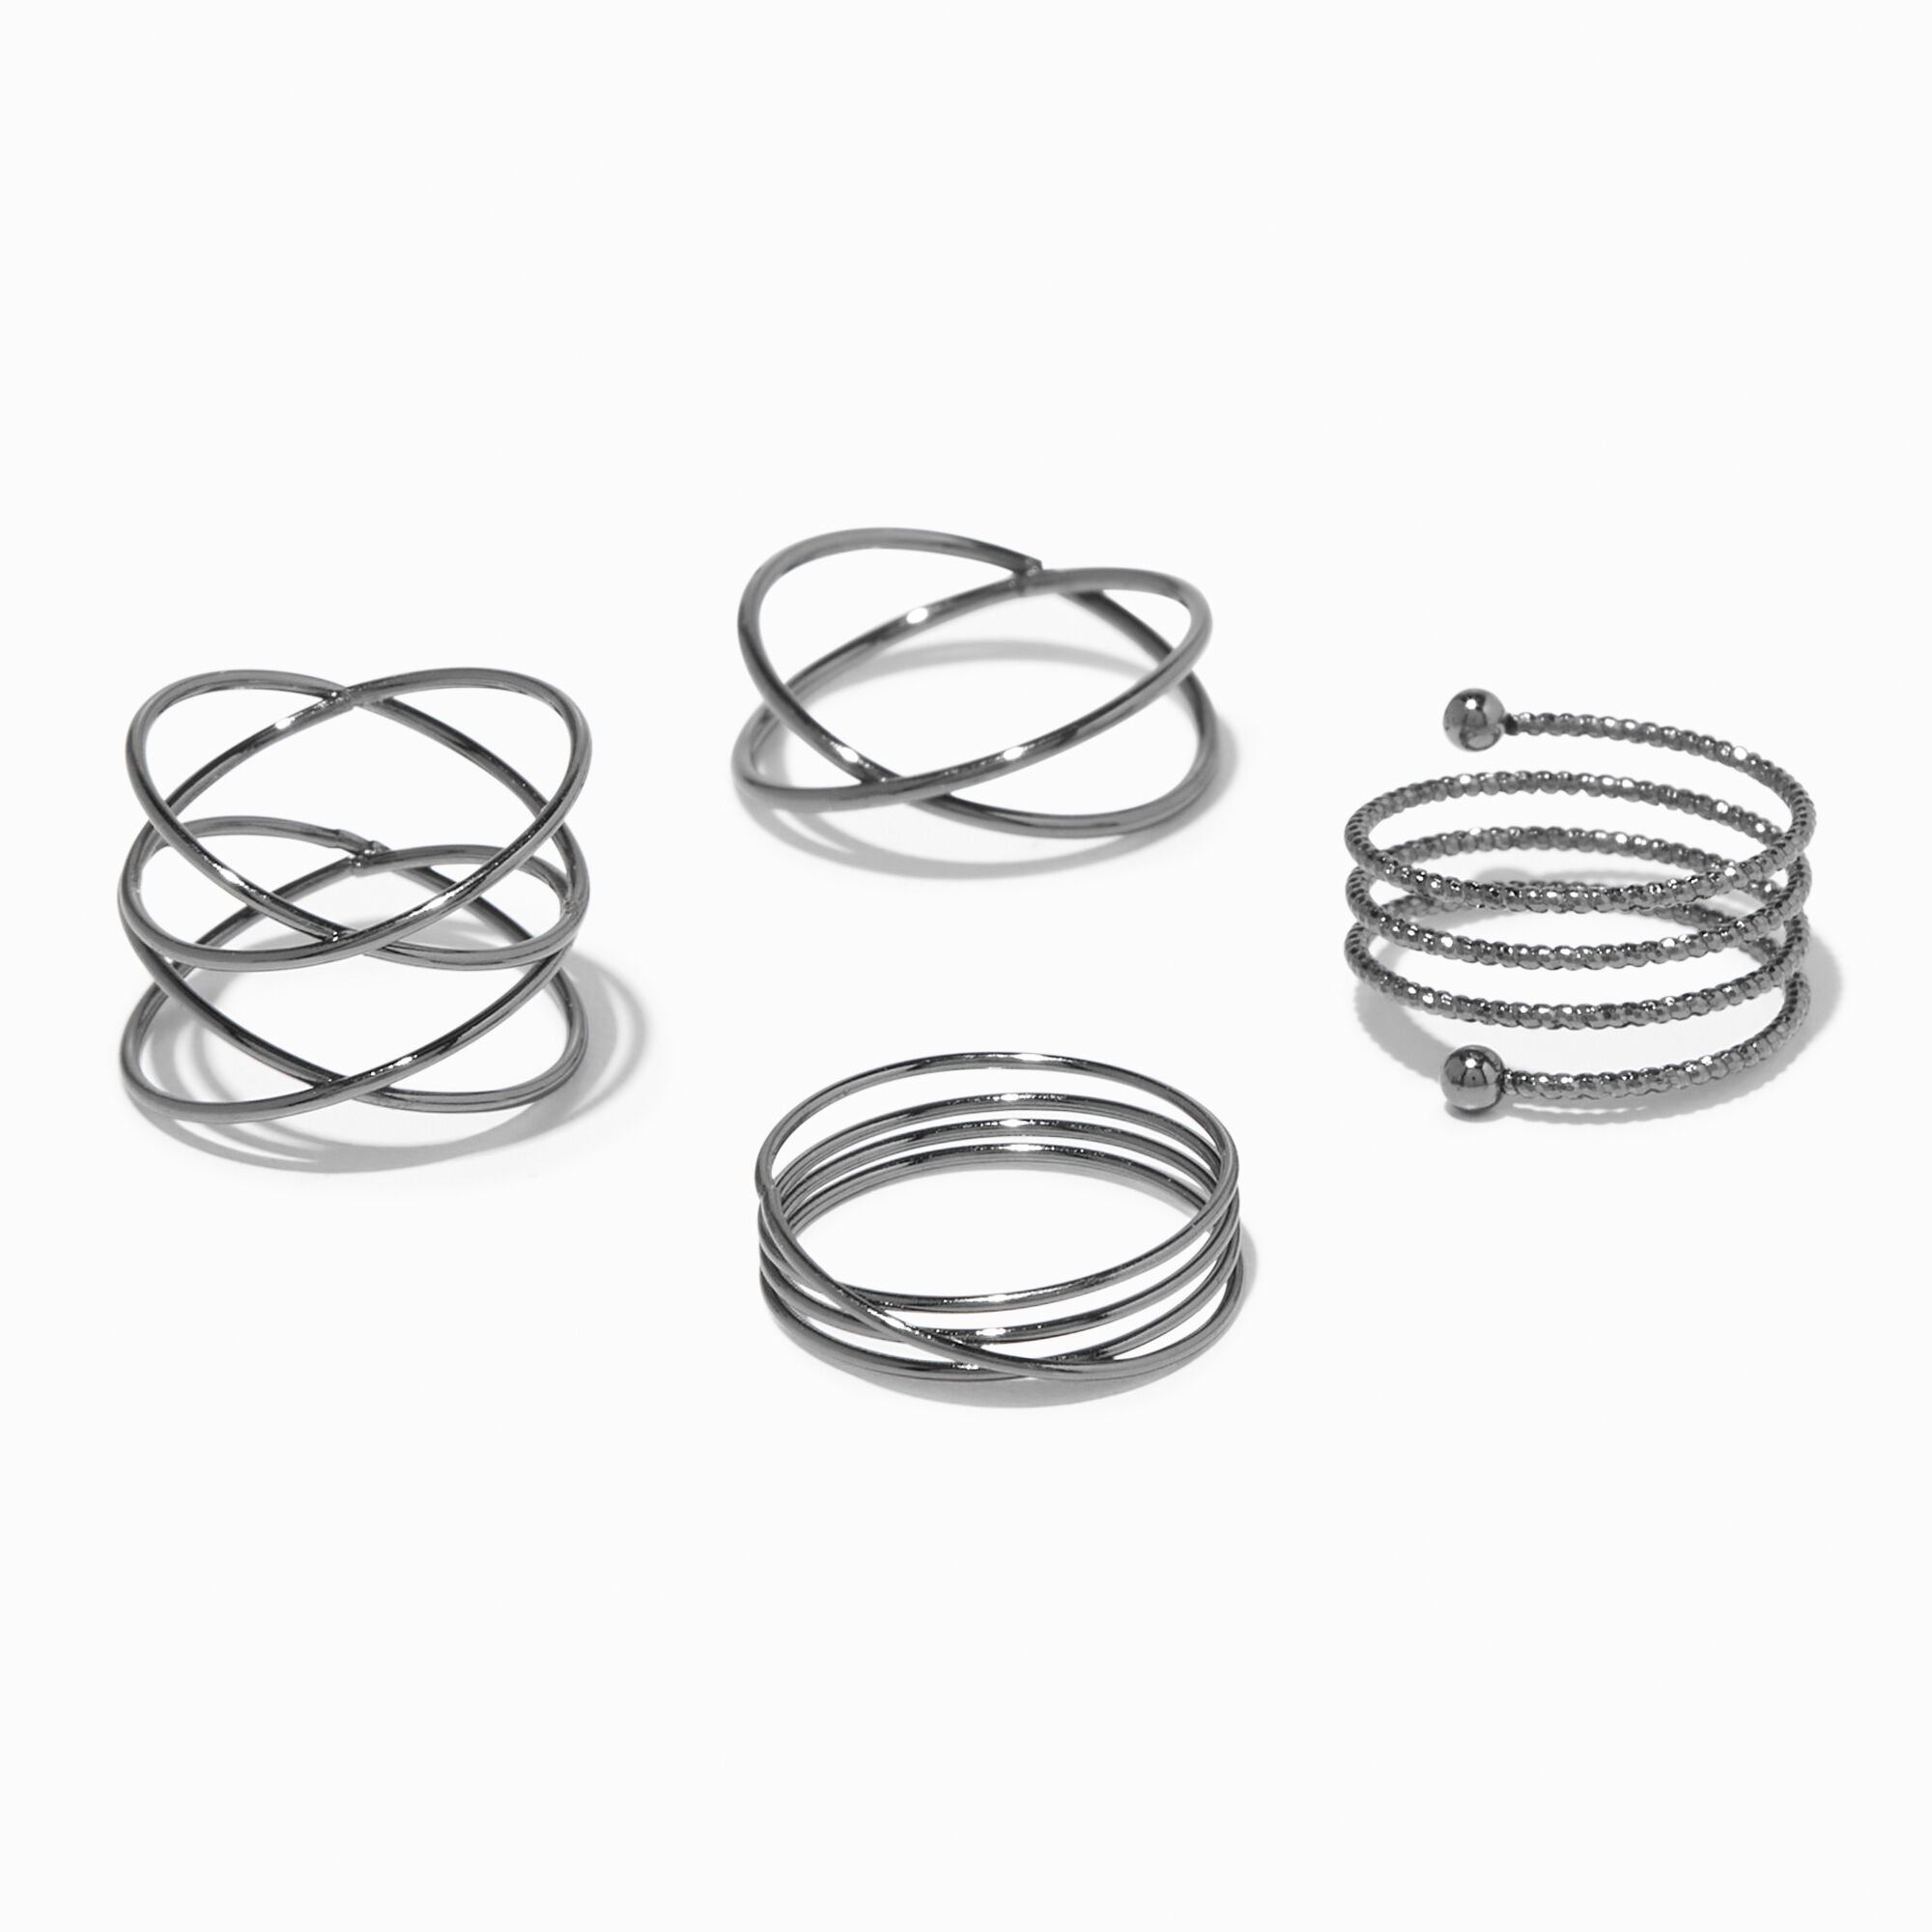 View Claires Hematite Spiral Rings 4 Pack information